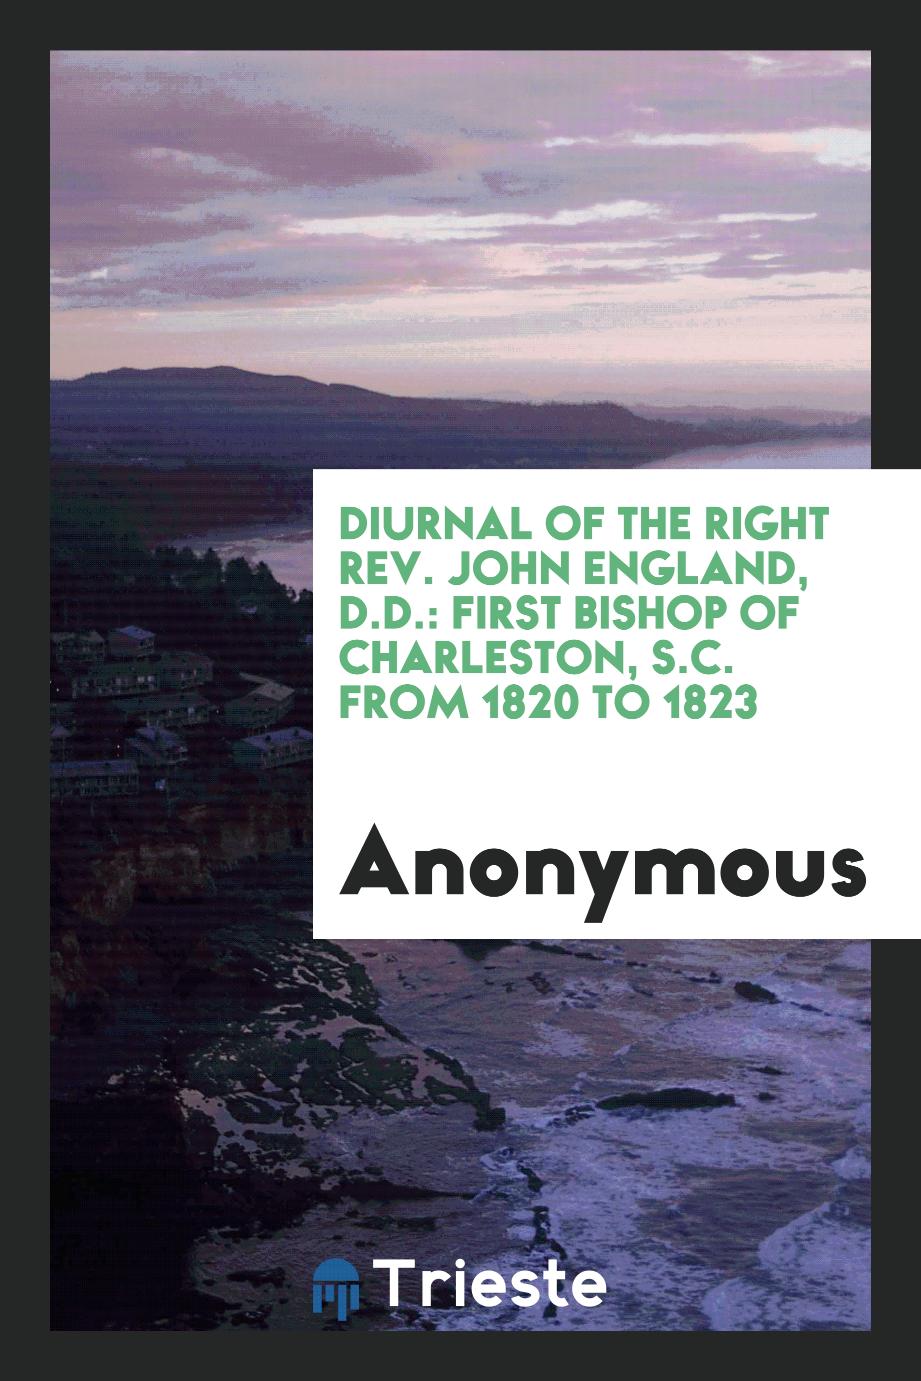 Diurnal of the Right Rev. John England, D.D.: First Bishop of Charleston, S.C. from 1820 to 1823